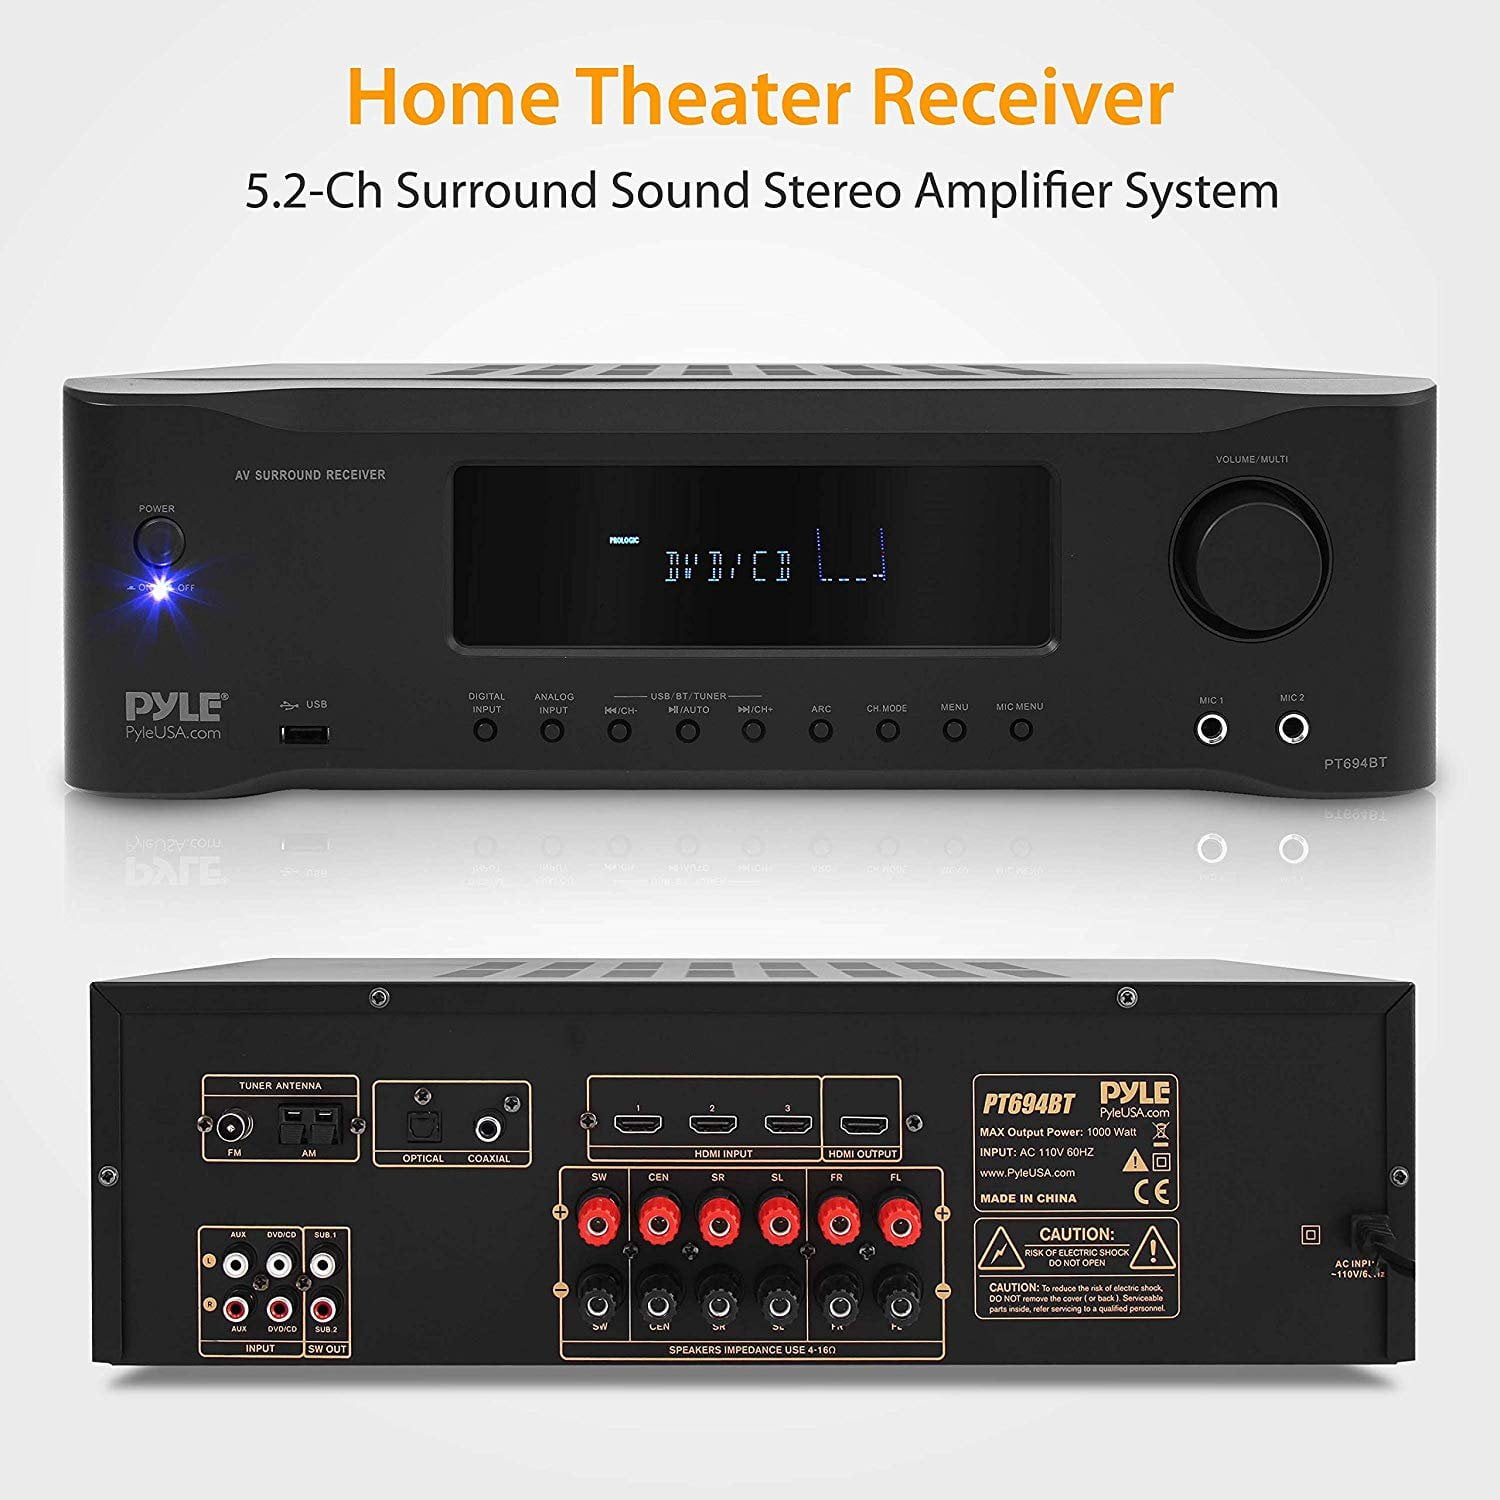 MP3/USB/AM/FM Radio 1000W Bluetooth Home Theater Receiver 5.2-Ch Surround Sound Stereo Amplifier System with 4K Ultra HD Renewed Pyle PT696BT 3D Video & Blu-Ray Video Pass-Through Supports 